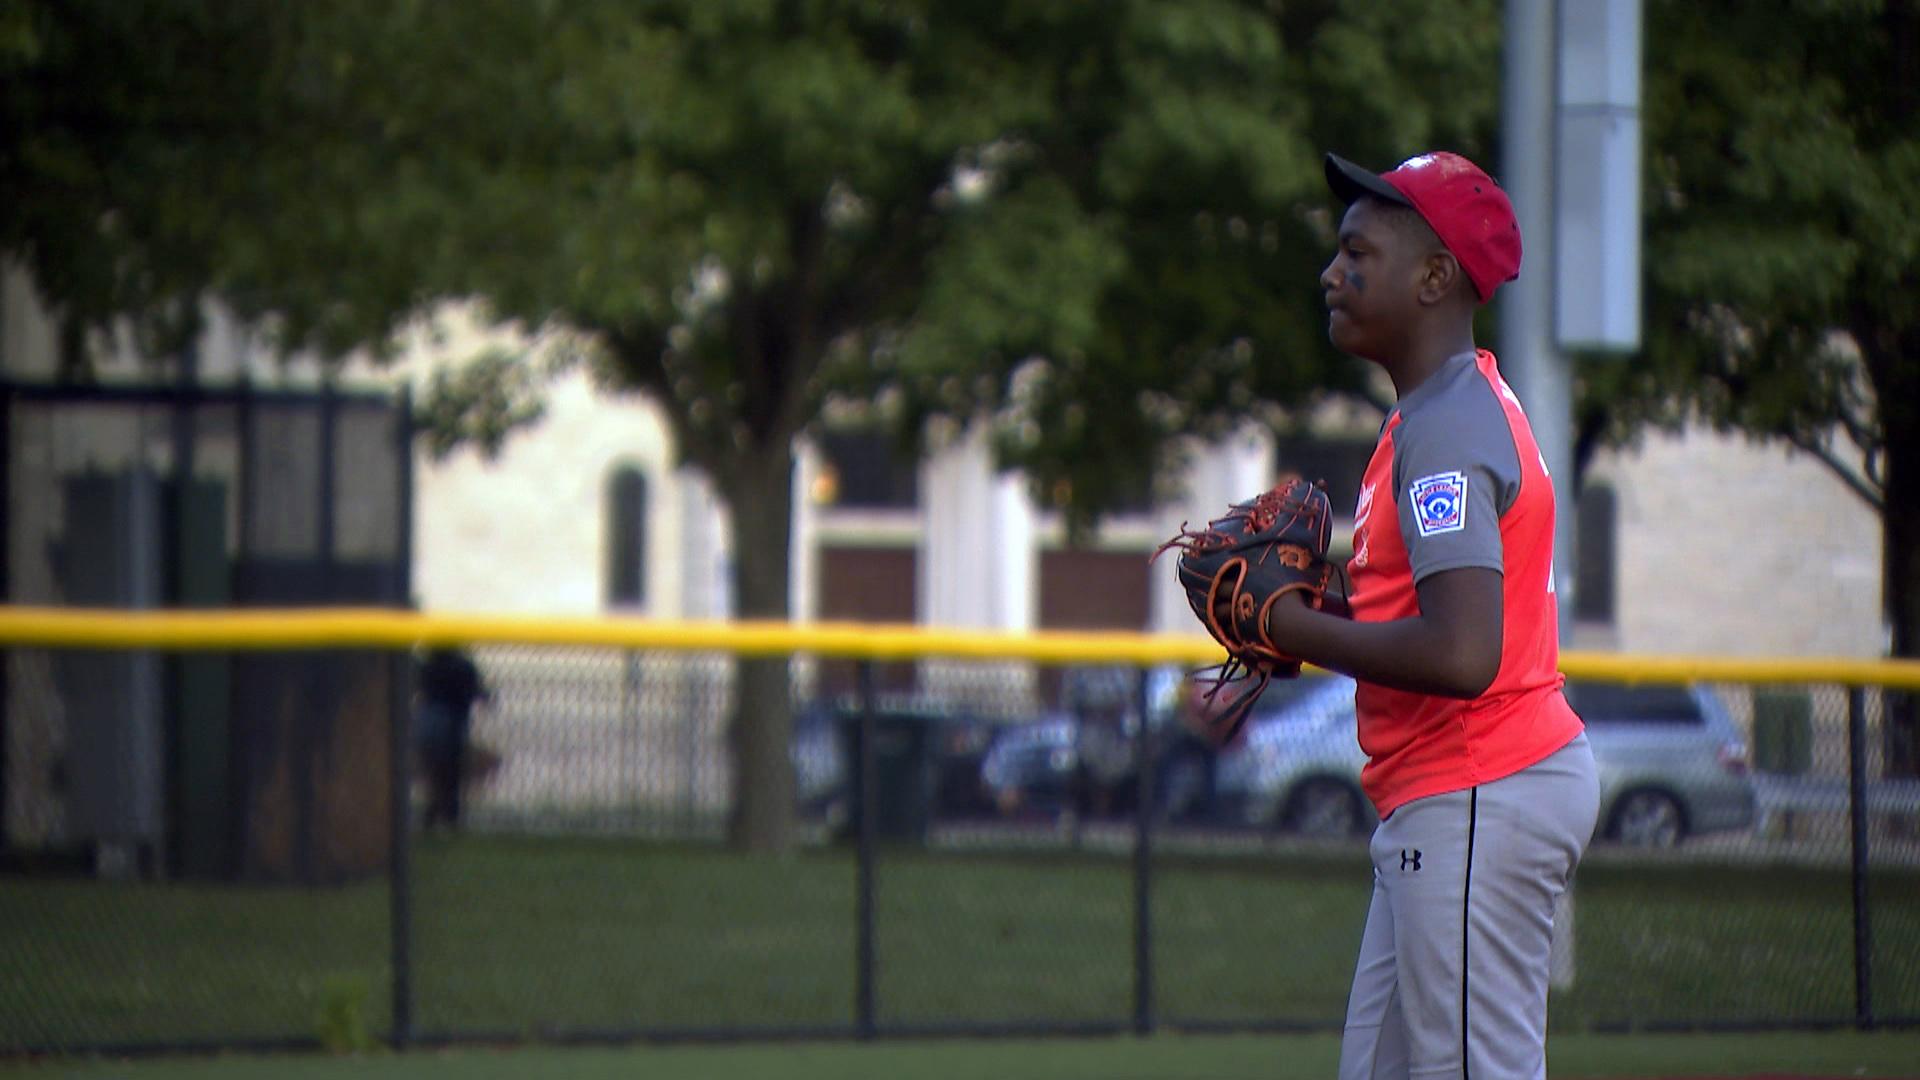 Chicago Westside Sports in action at Columbus Park. (WTTW News)